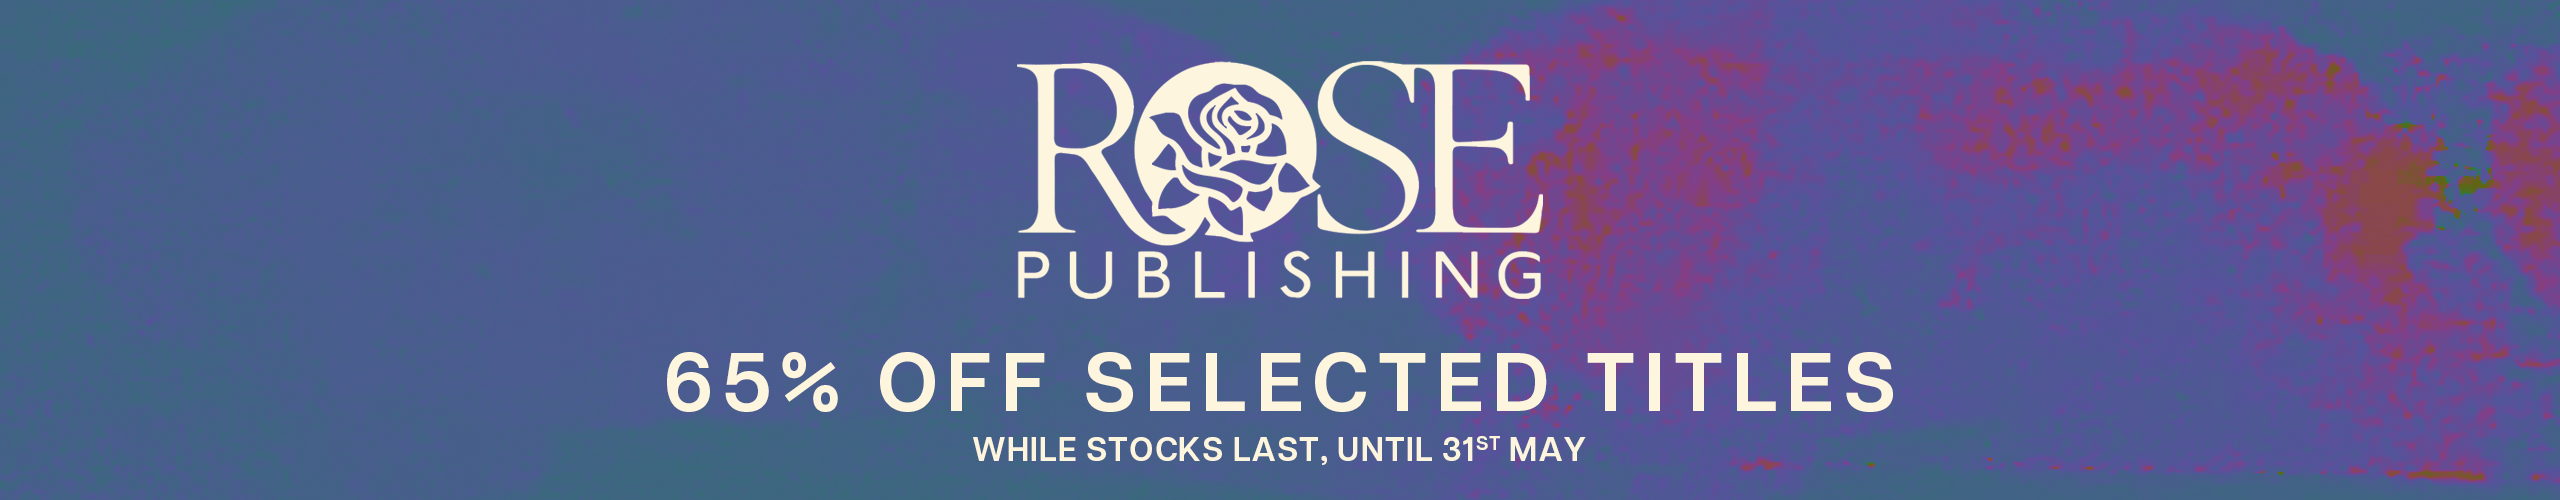 Rose Publishing 65% off selected titles